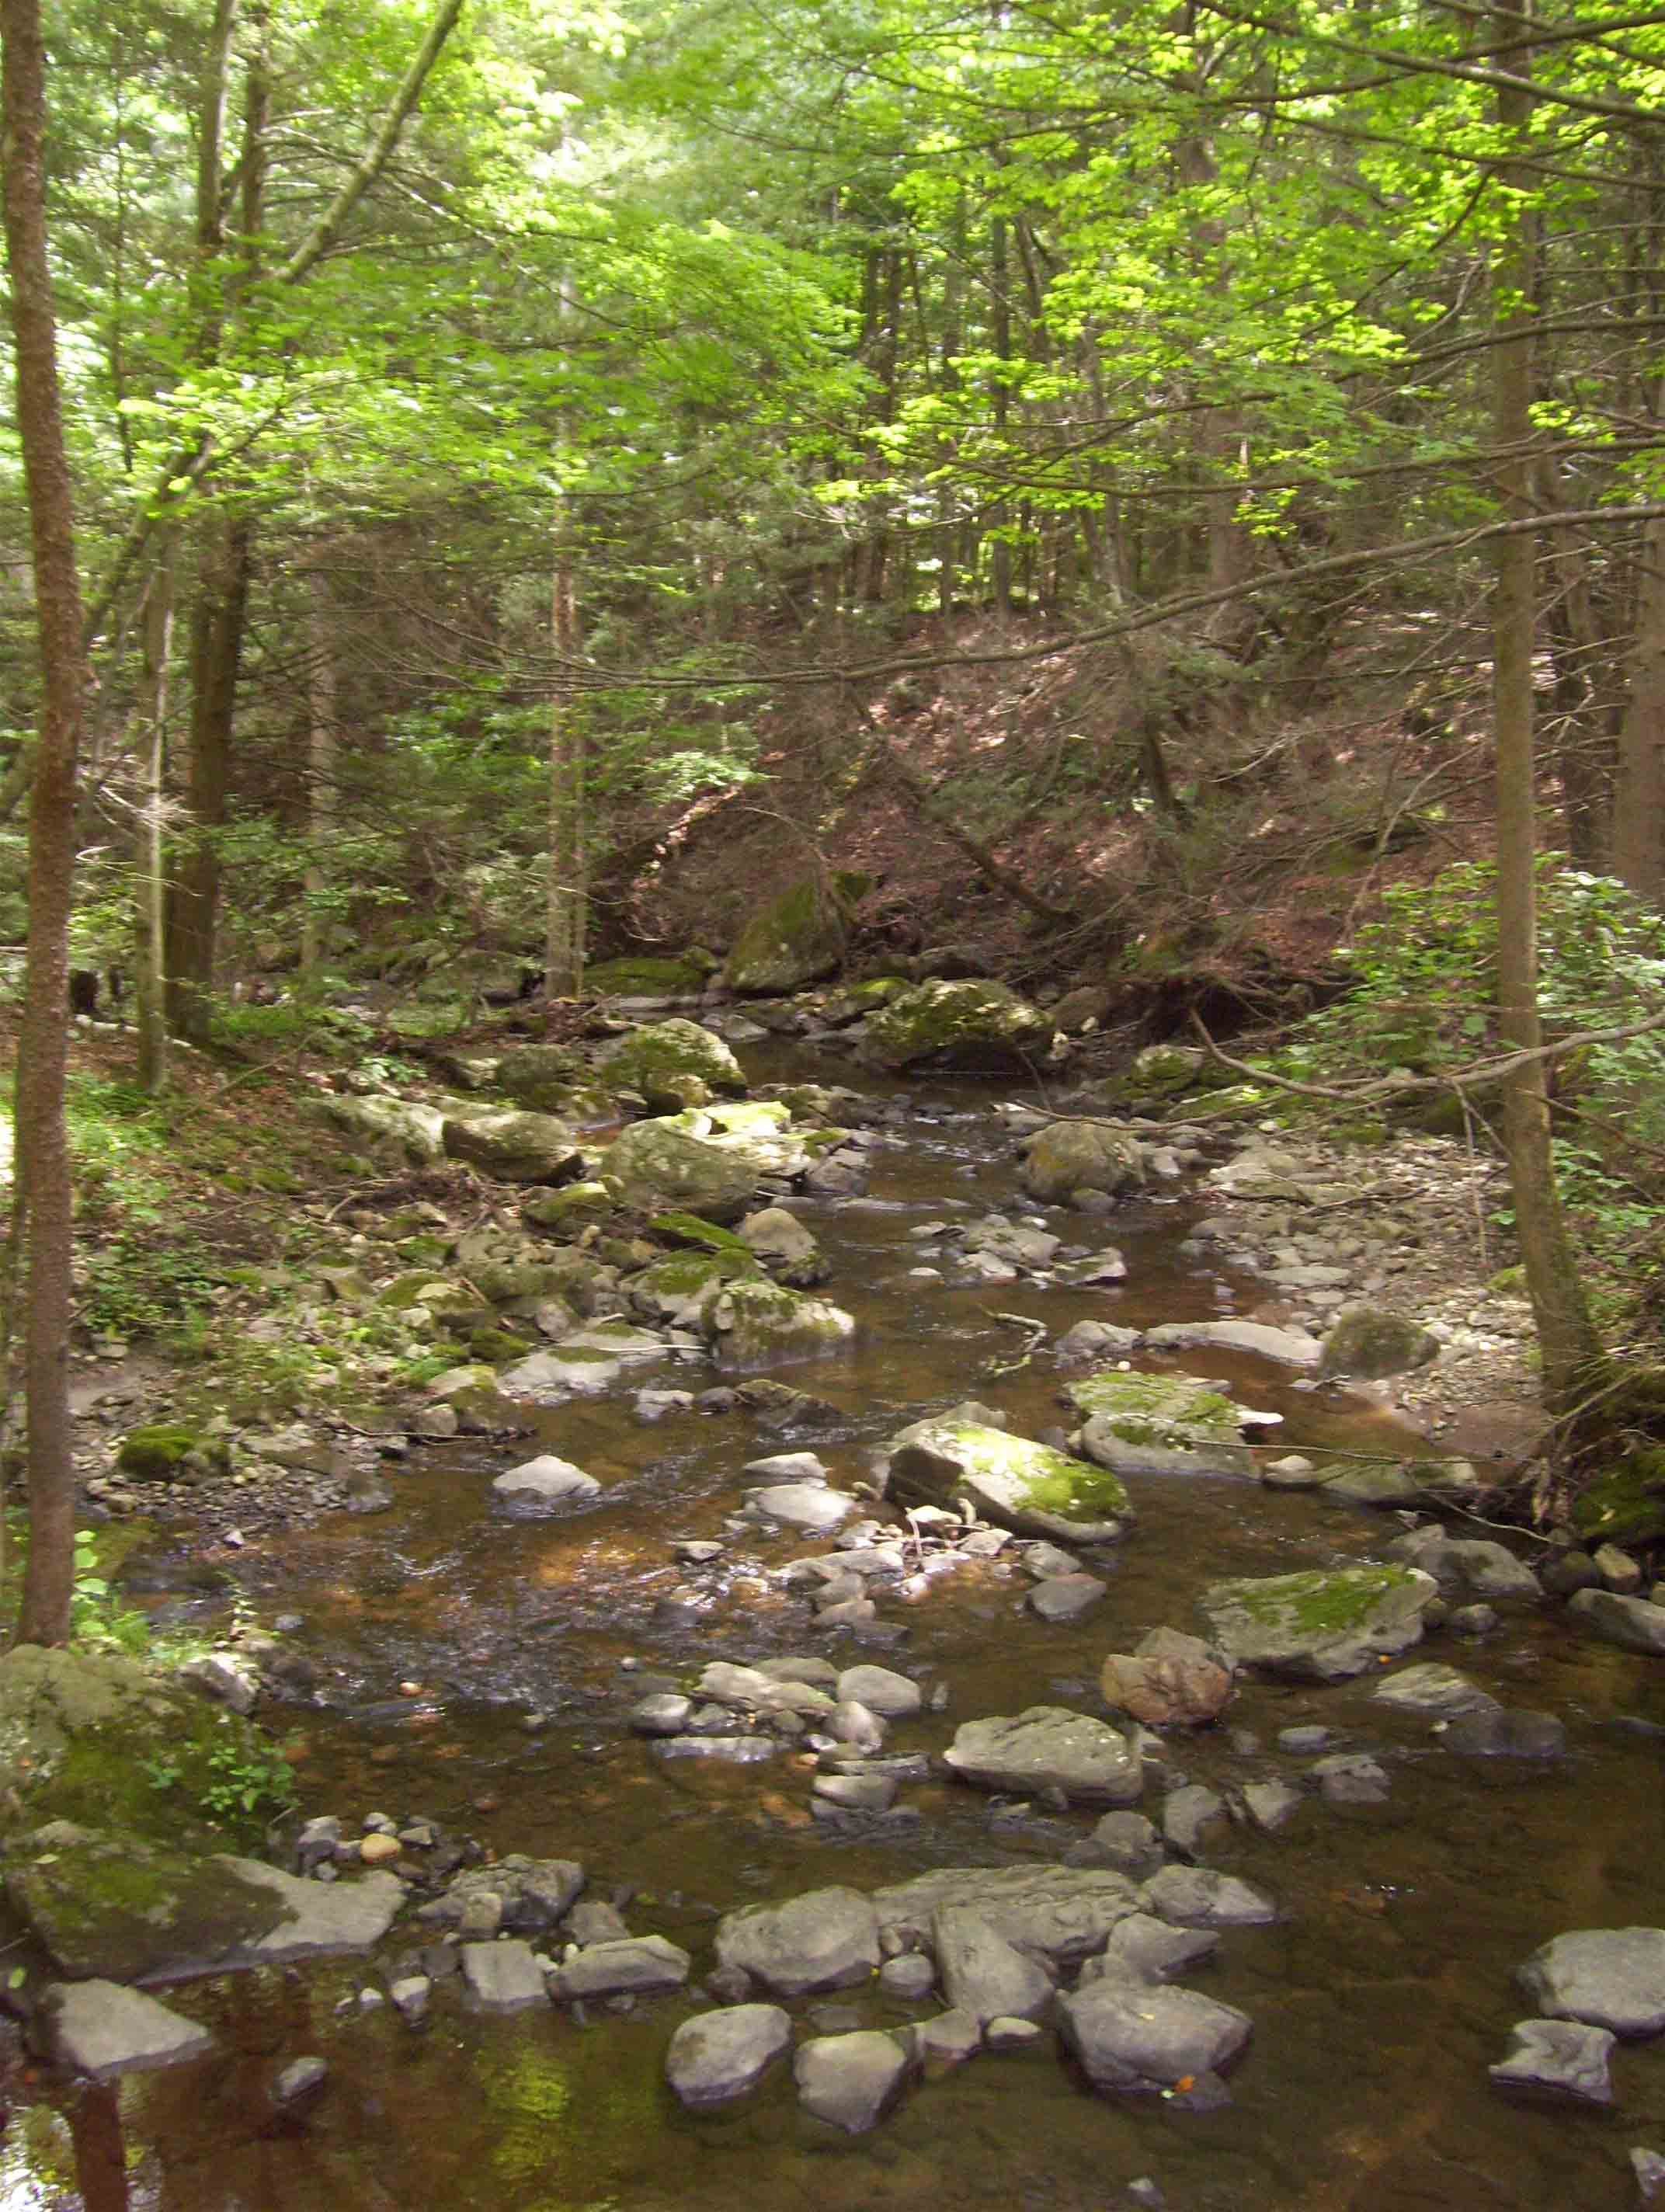 mm 0.7 Duell Hollow Brook from foot bridge.  Courtesy dlcul@conncoll.edu